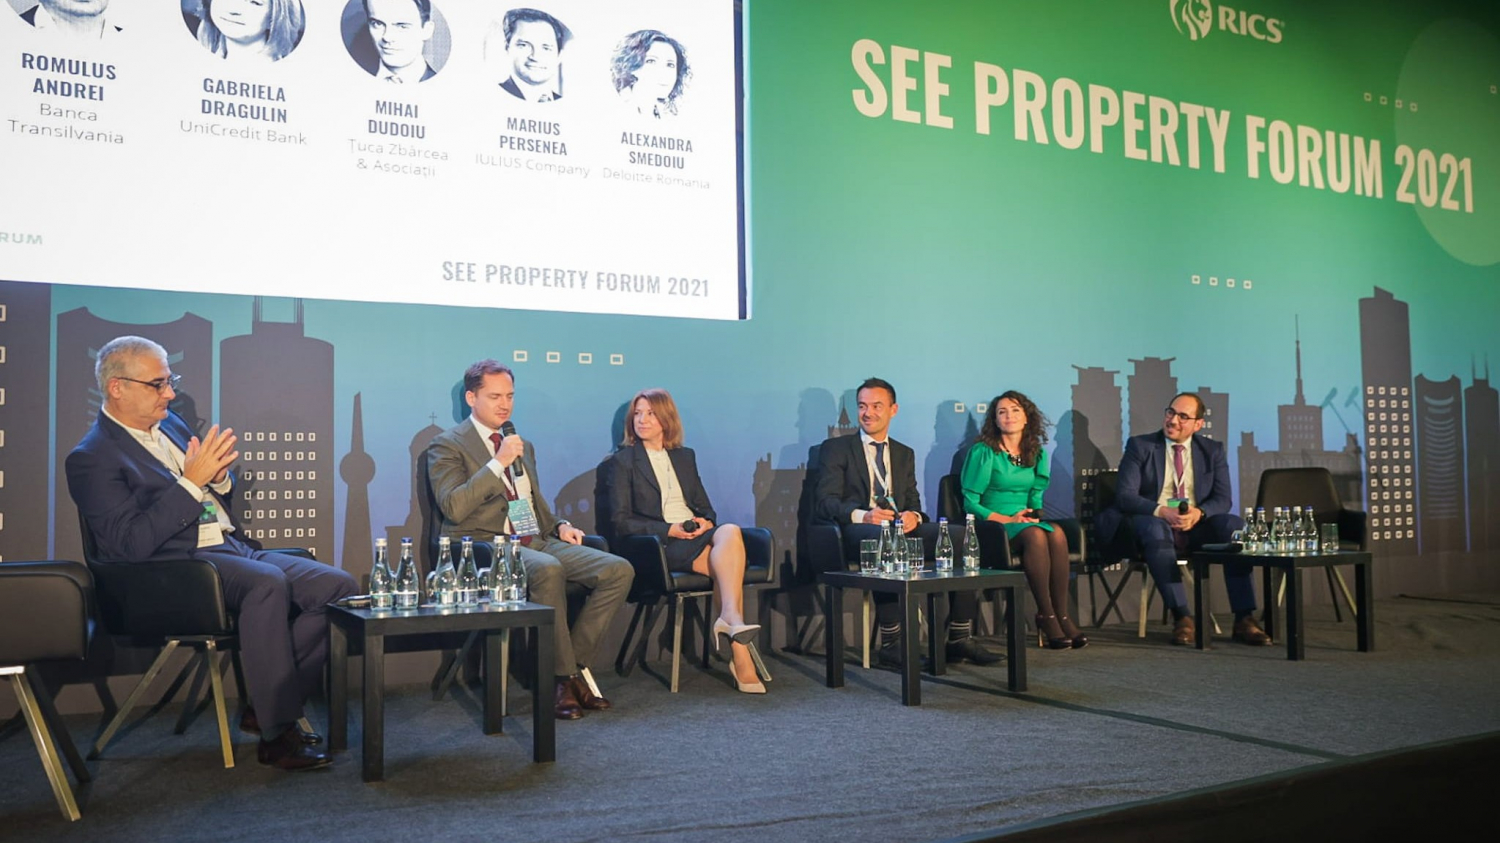 News Article conference development event financing investment report Romania SEE Property Forum 2021